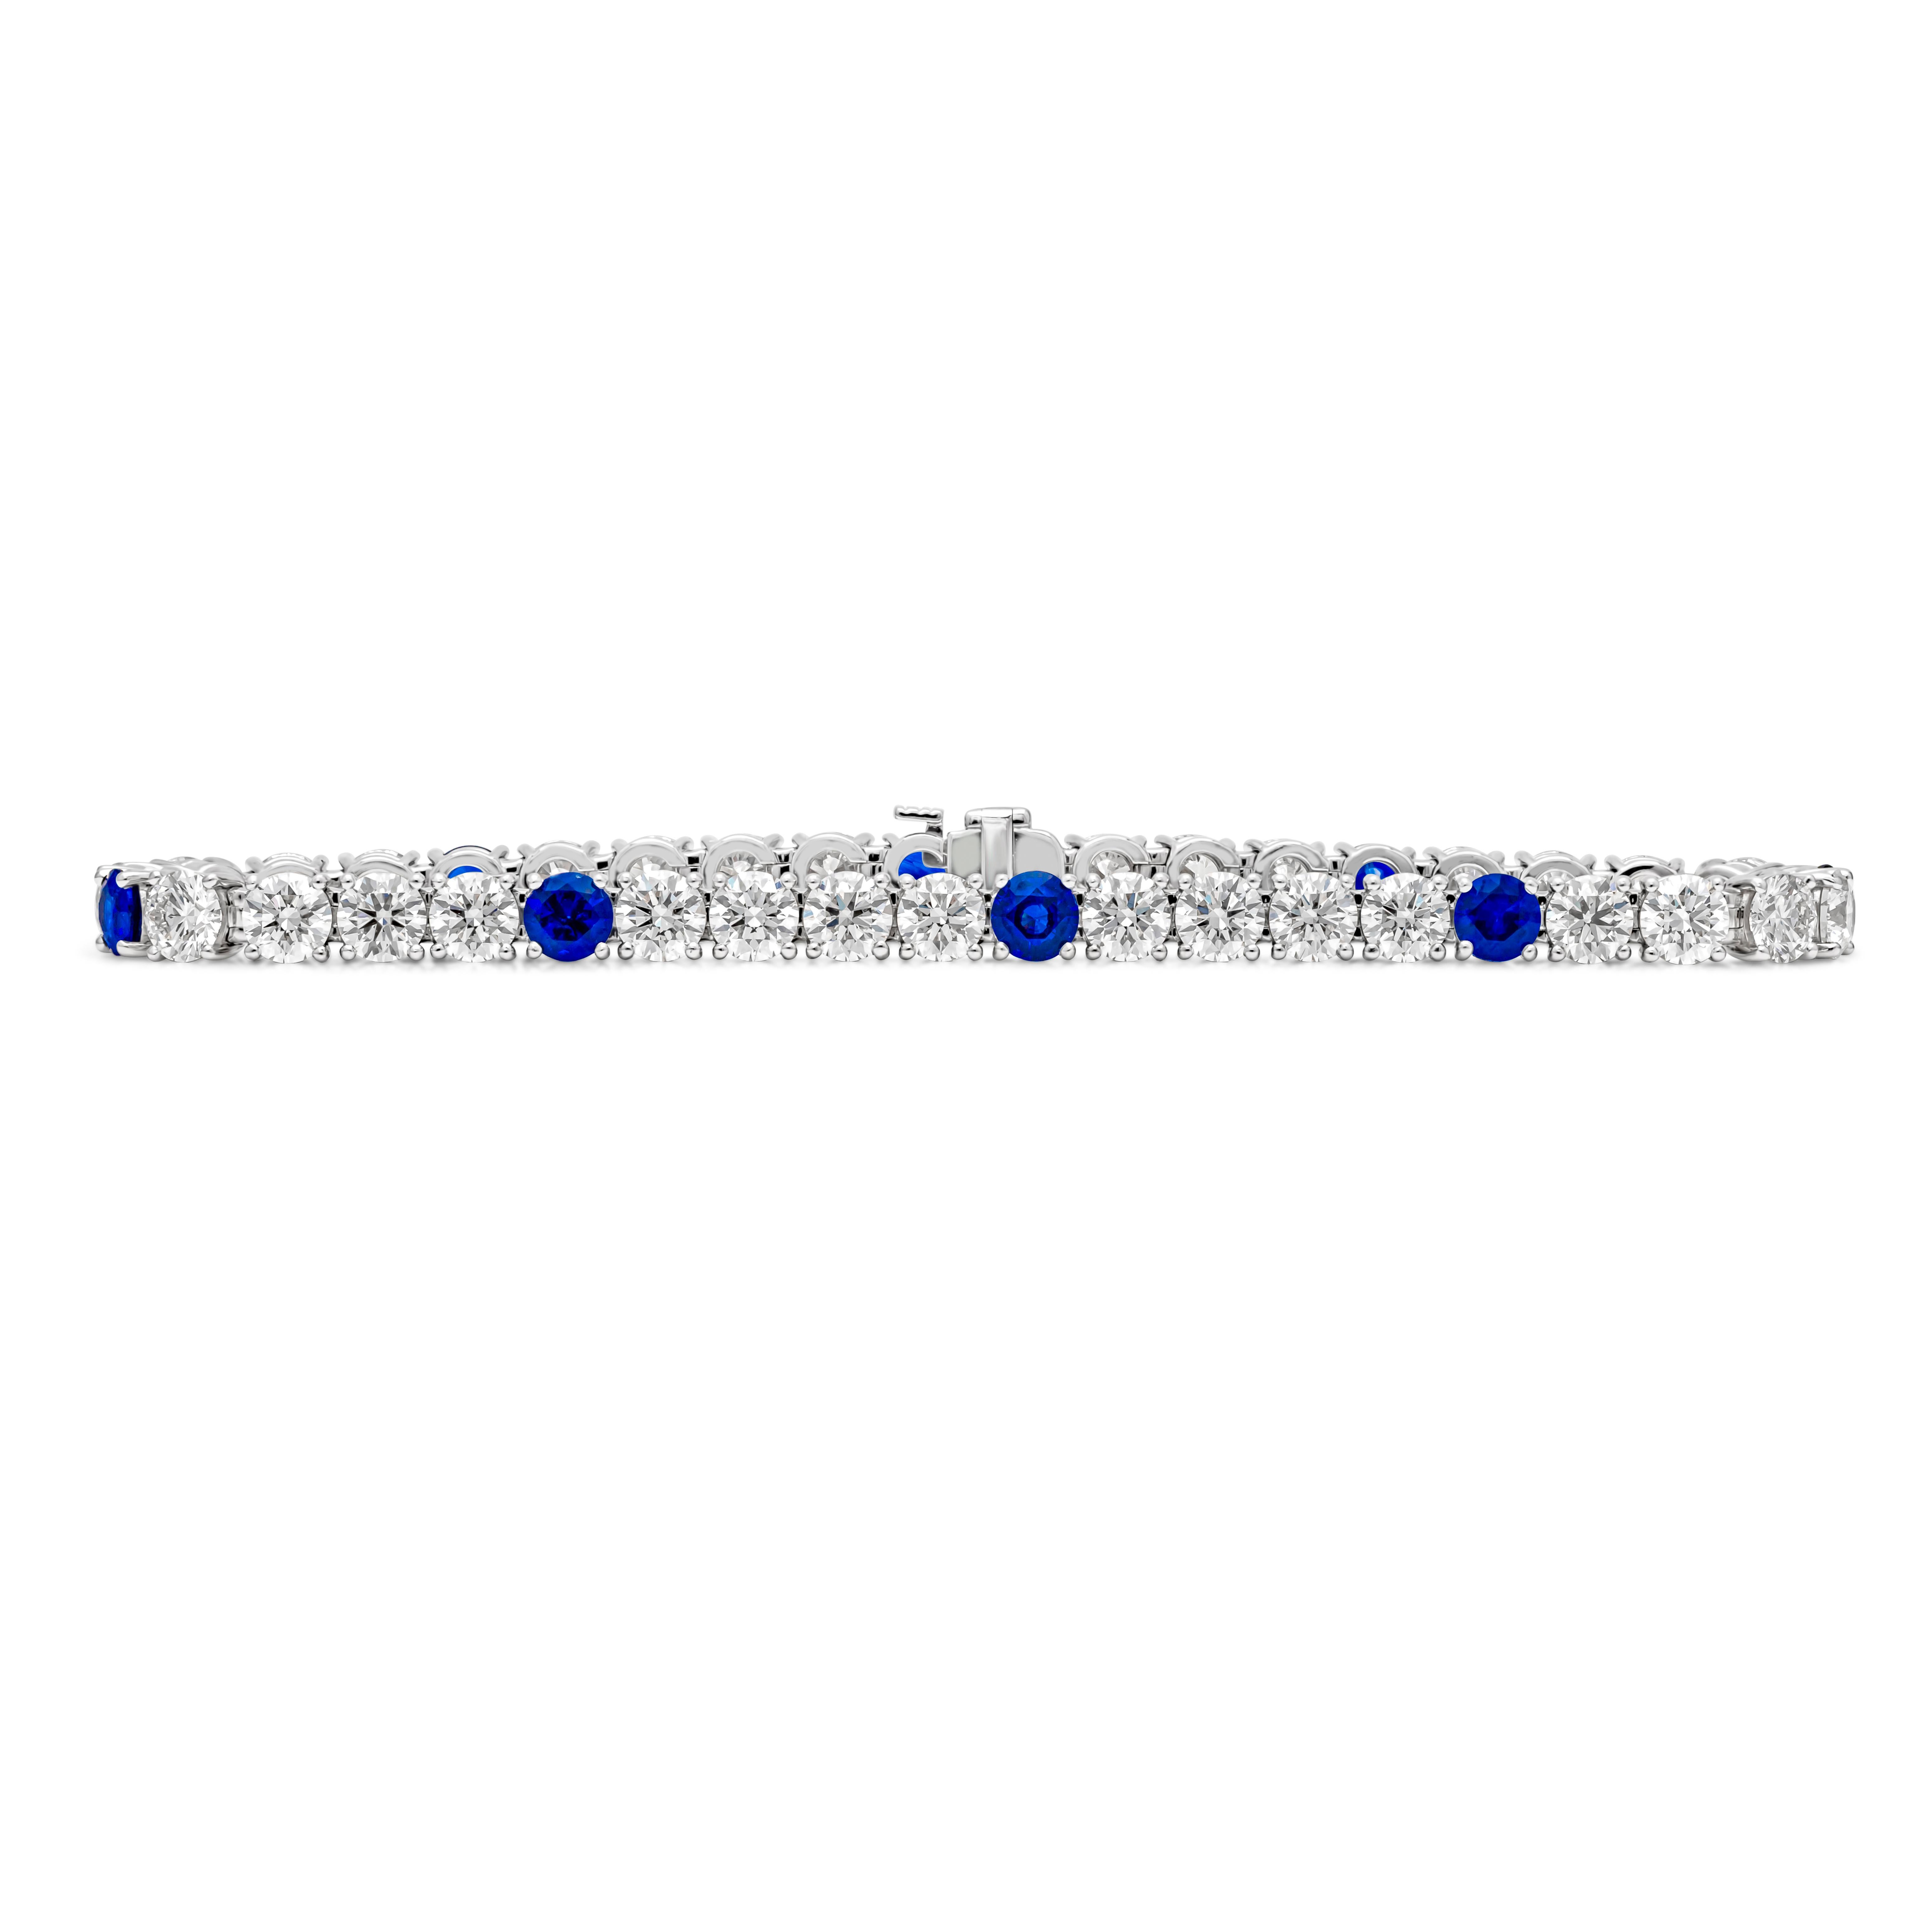 An exquisite and classy tennis bracelet showcasing 32 brilliant round cut diamonds weighing 13.00 carats total, G color, VS+ in clarity and  set in a classic four prong basket setting, elegantly spaced by 8 color-rich blue sapphires weighing 3.48